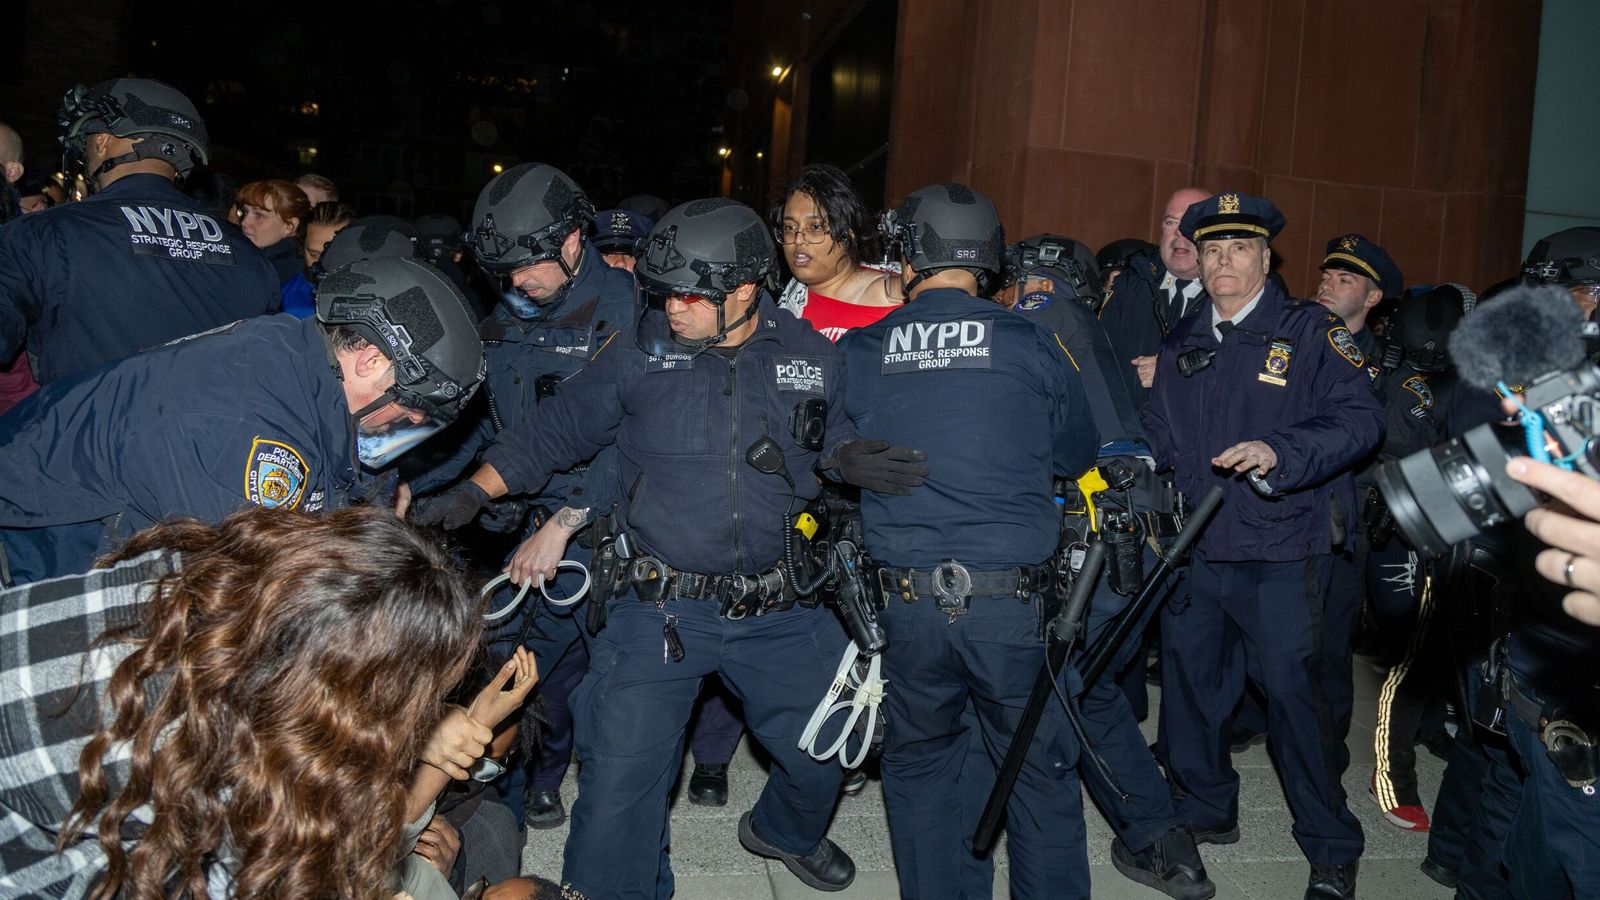 More than 100 arrested at New York University as campus protests spread